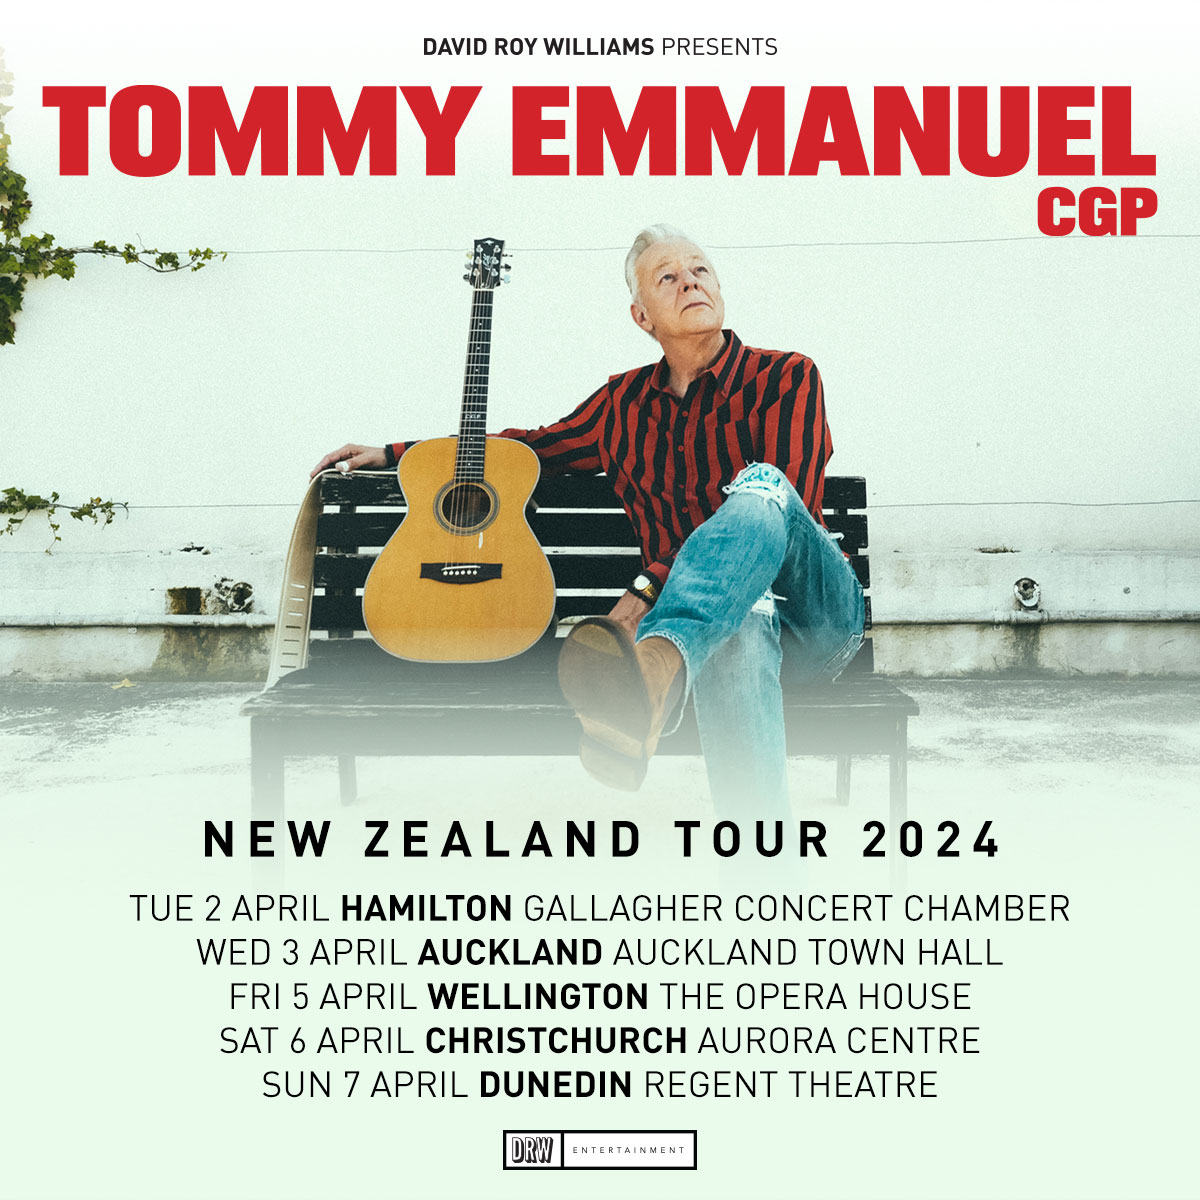 I’m finally back in New Zealand. What an amazing country. Come out and see me…I promise to bring the heat!